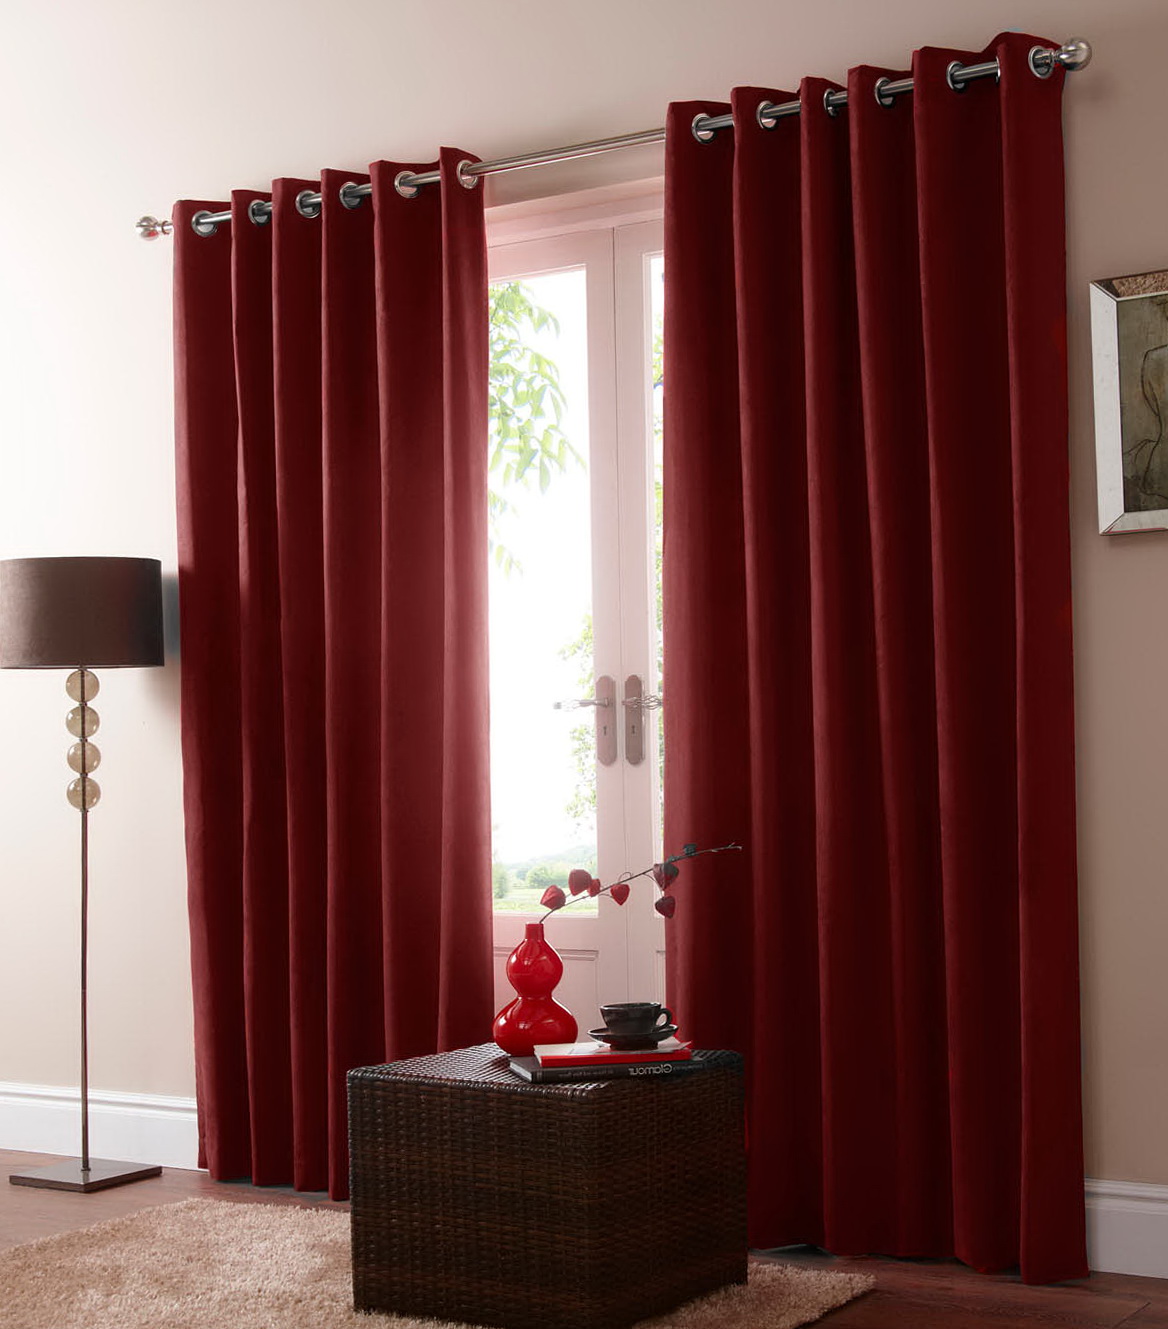 Red Blackout Curtains Uk | Home Design Ideas